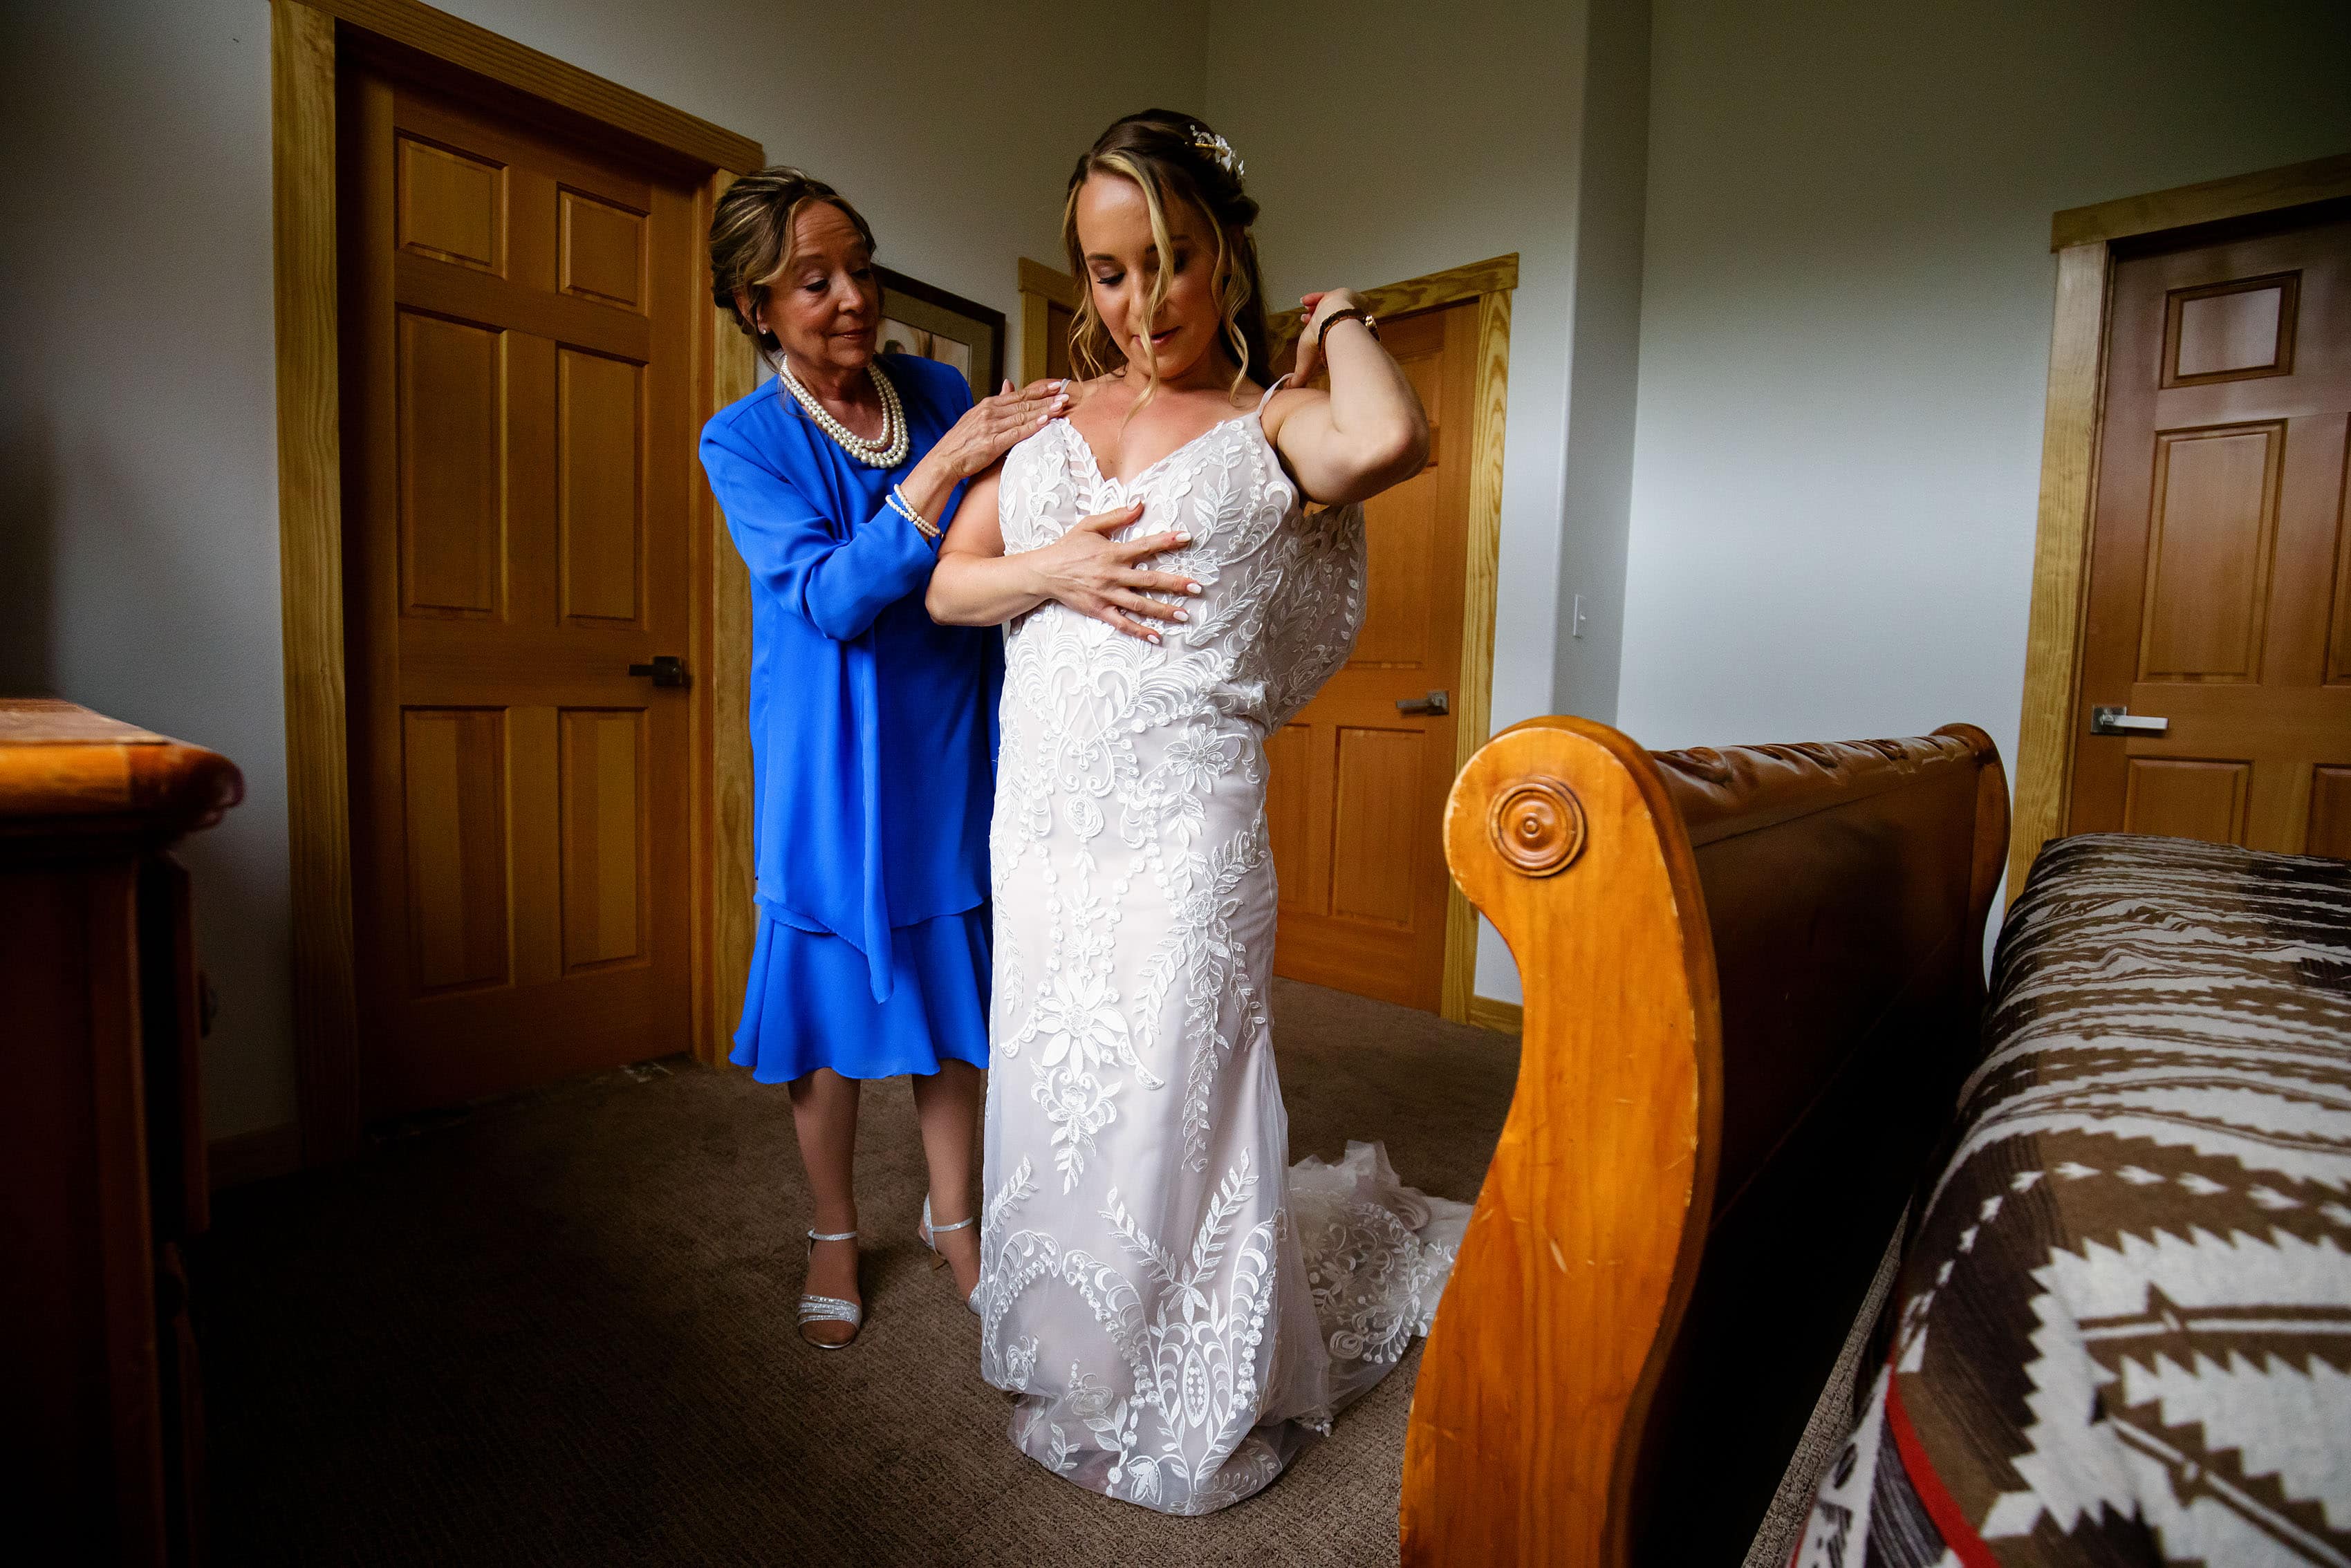 The bride gets dressed